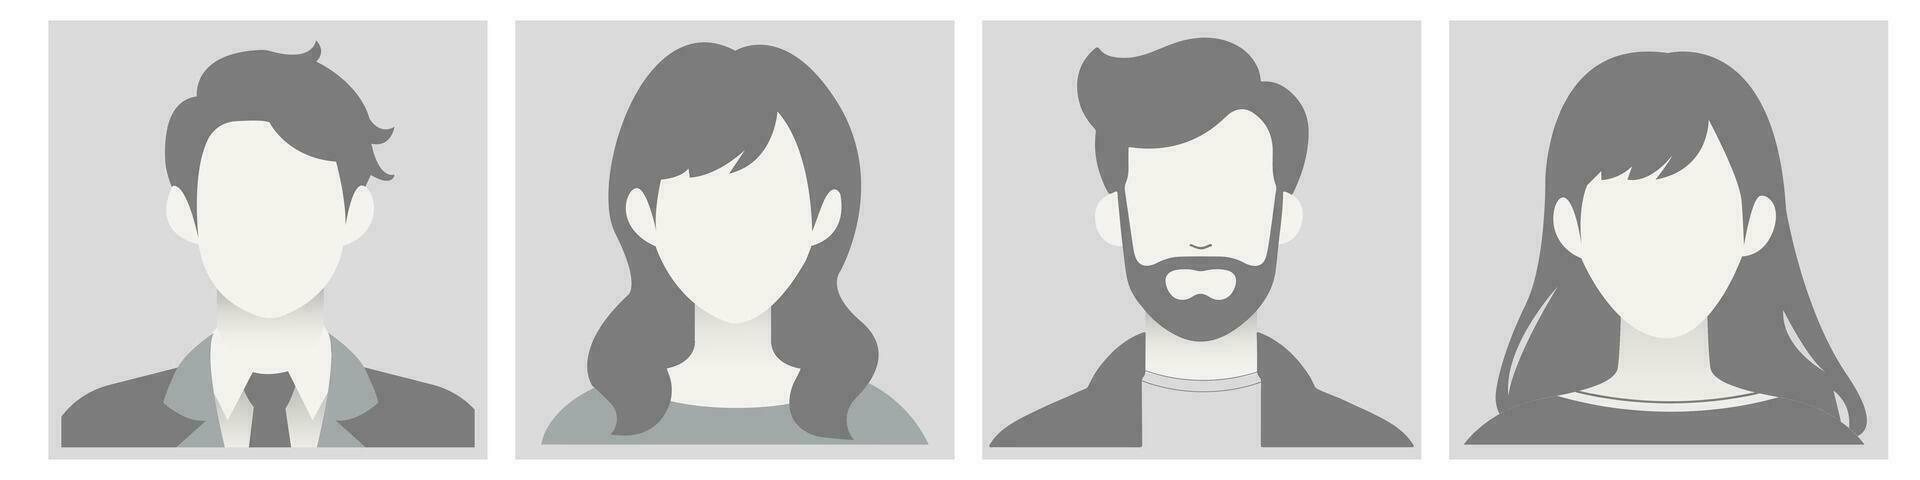 grayscale Avatar, user profile, person icon, silhouette, profile picture for unknown or anonymous individuals. The illustration portrays man and woman portrait for social media profiles, screensavers vector